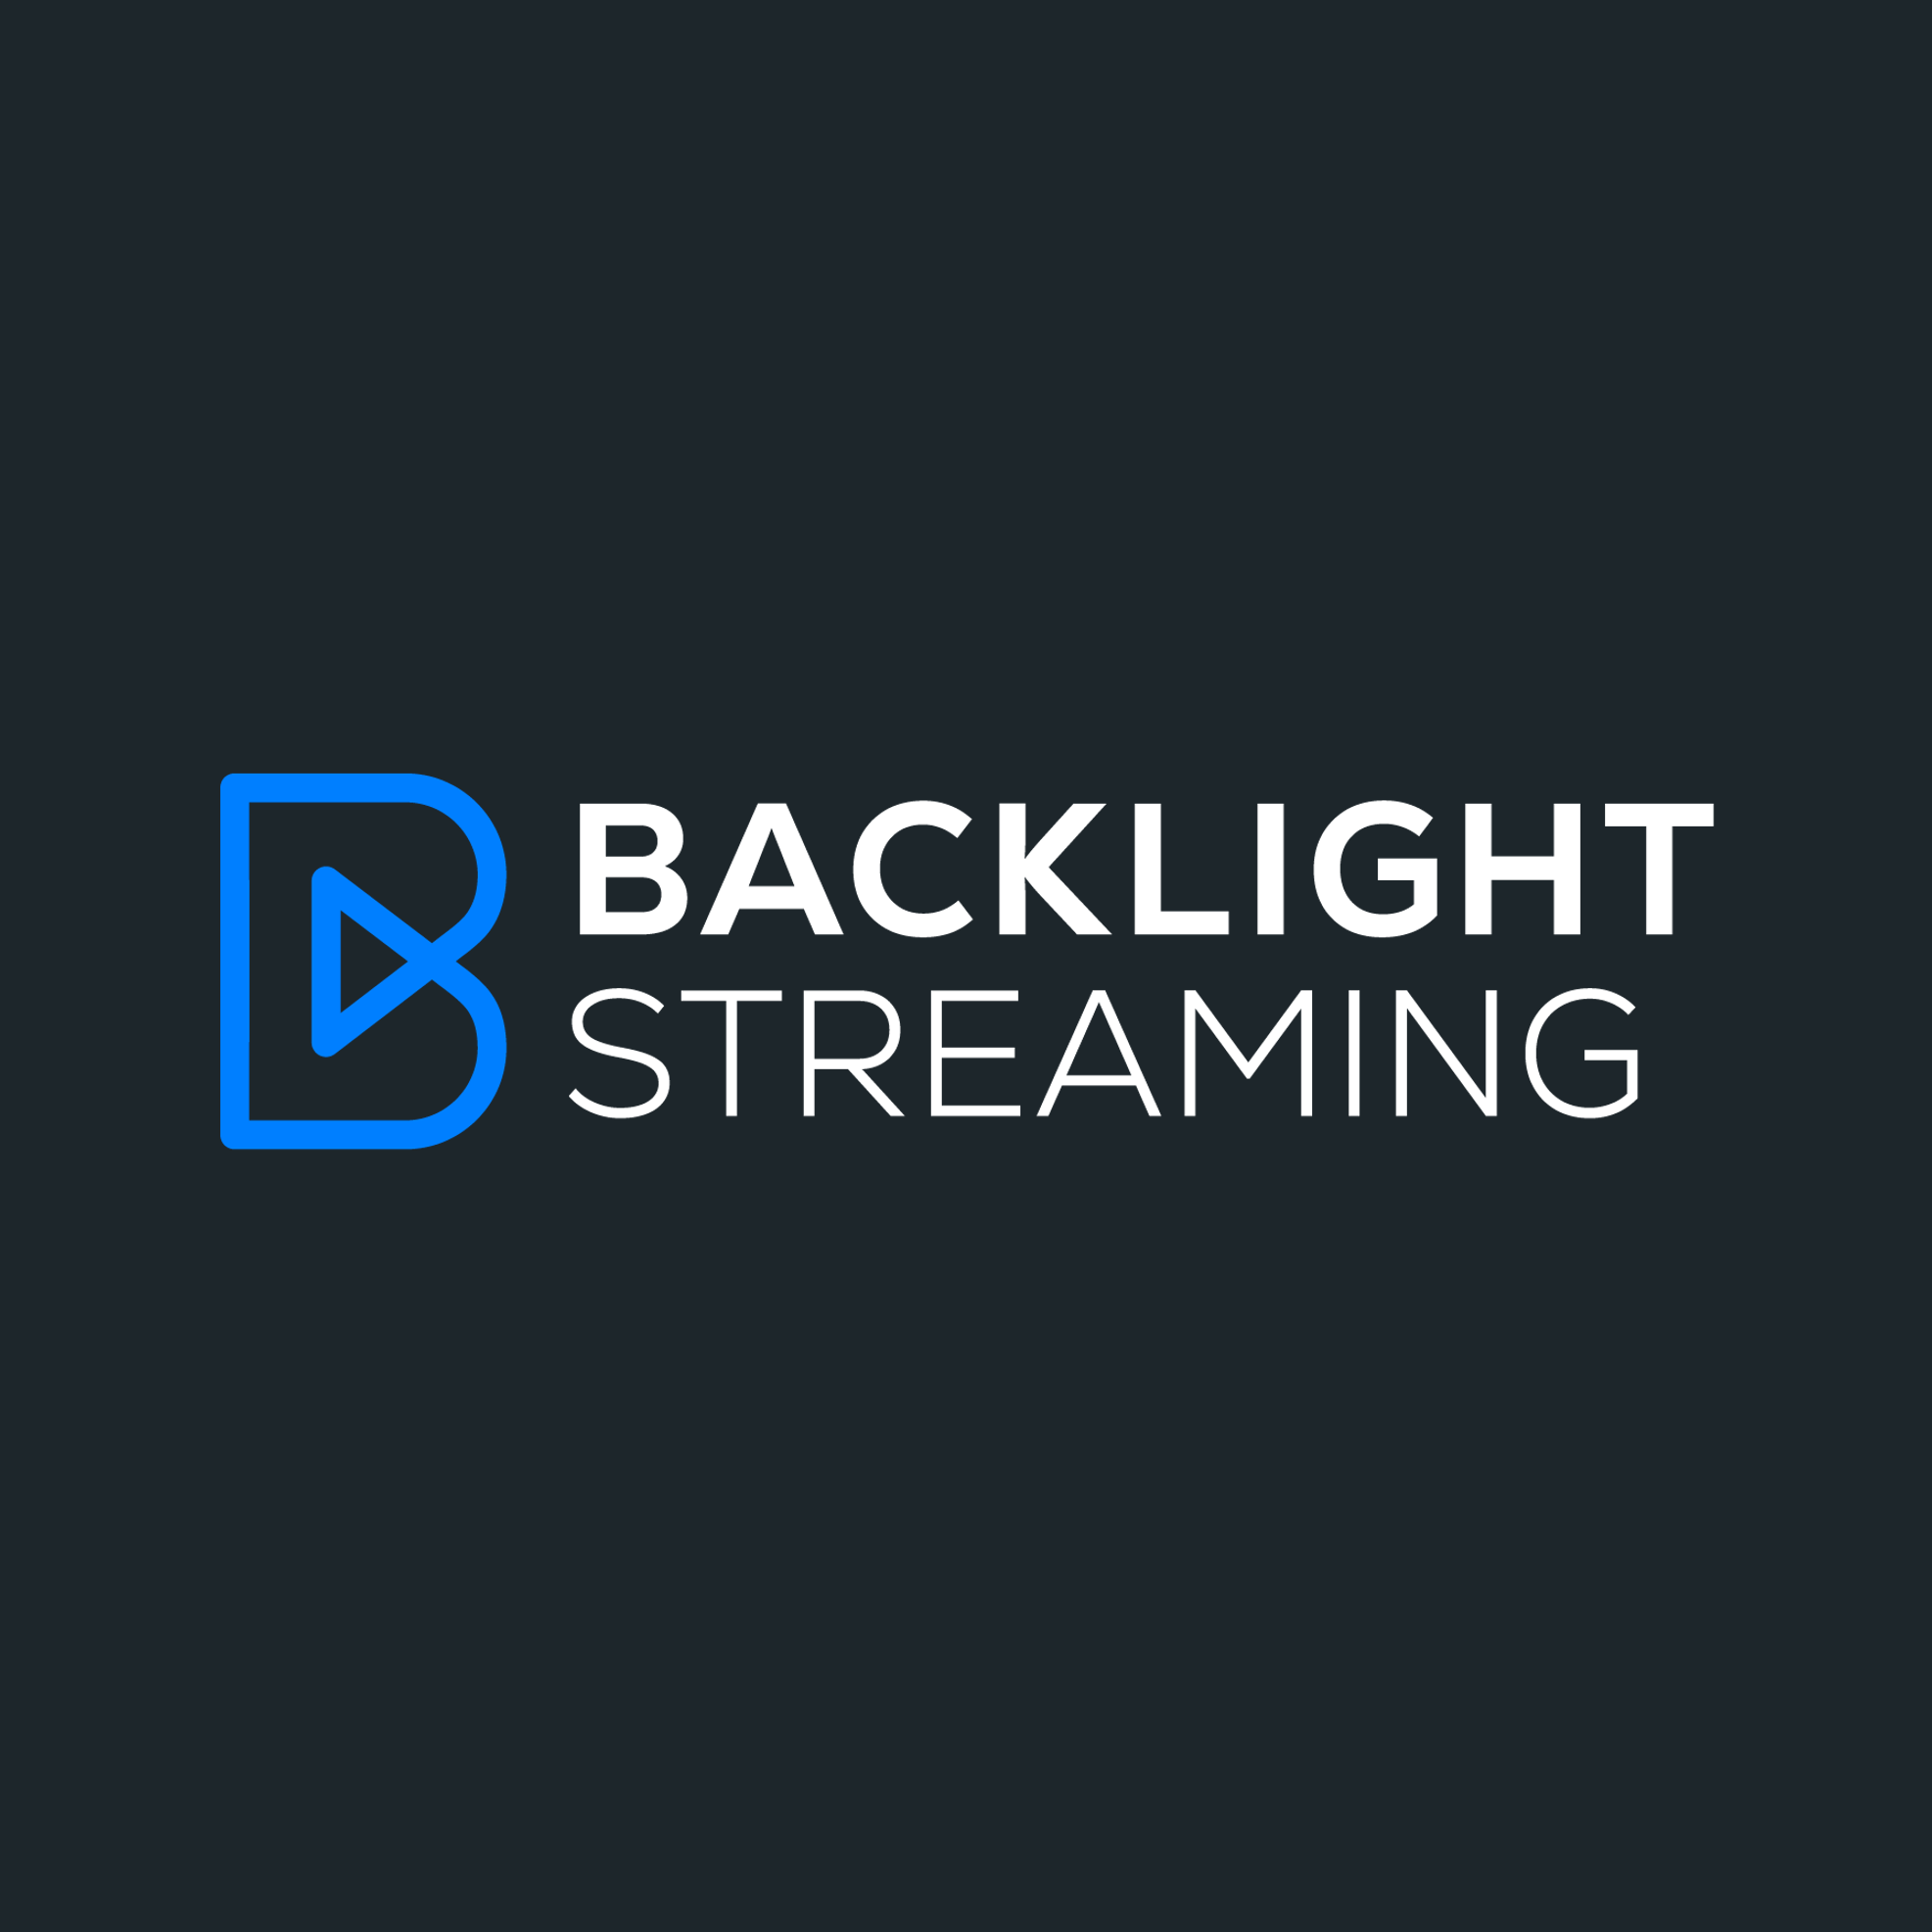 Backlight Announces New Organizational Structure with Two Divisions: Backlight Creative and Backlight Streaming